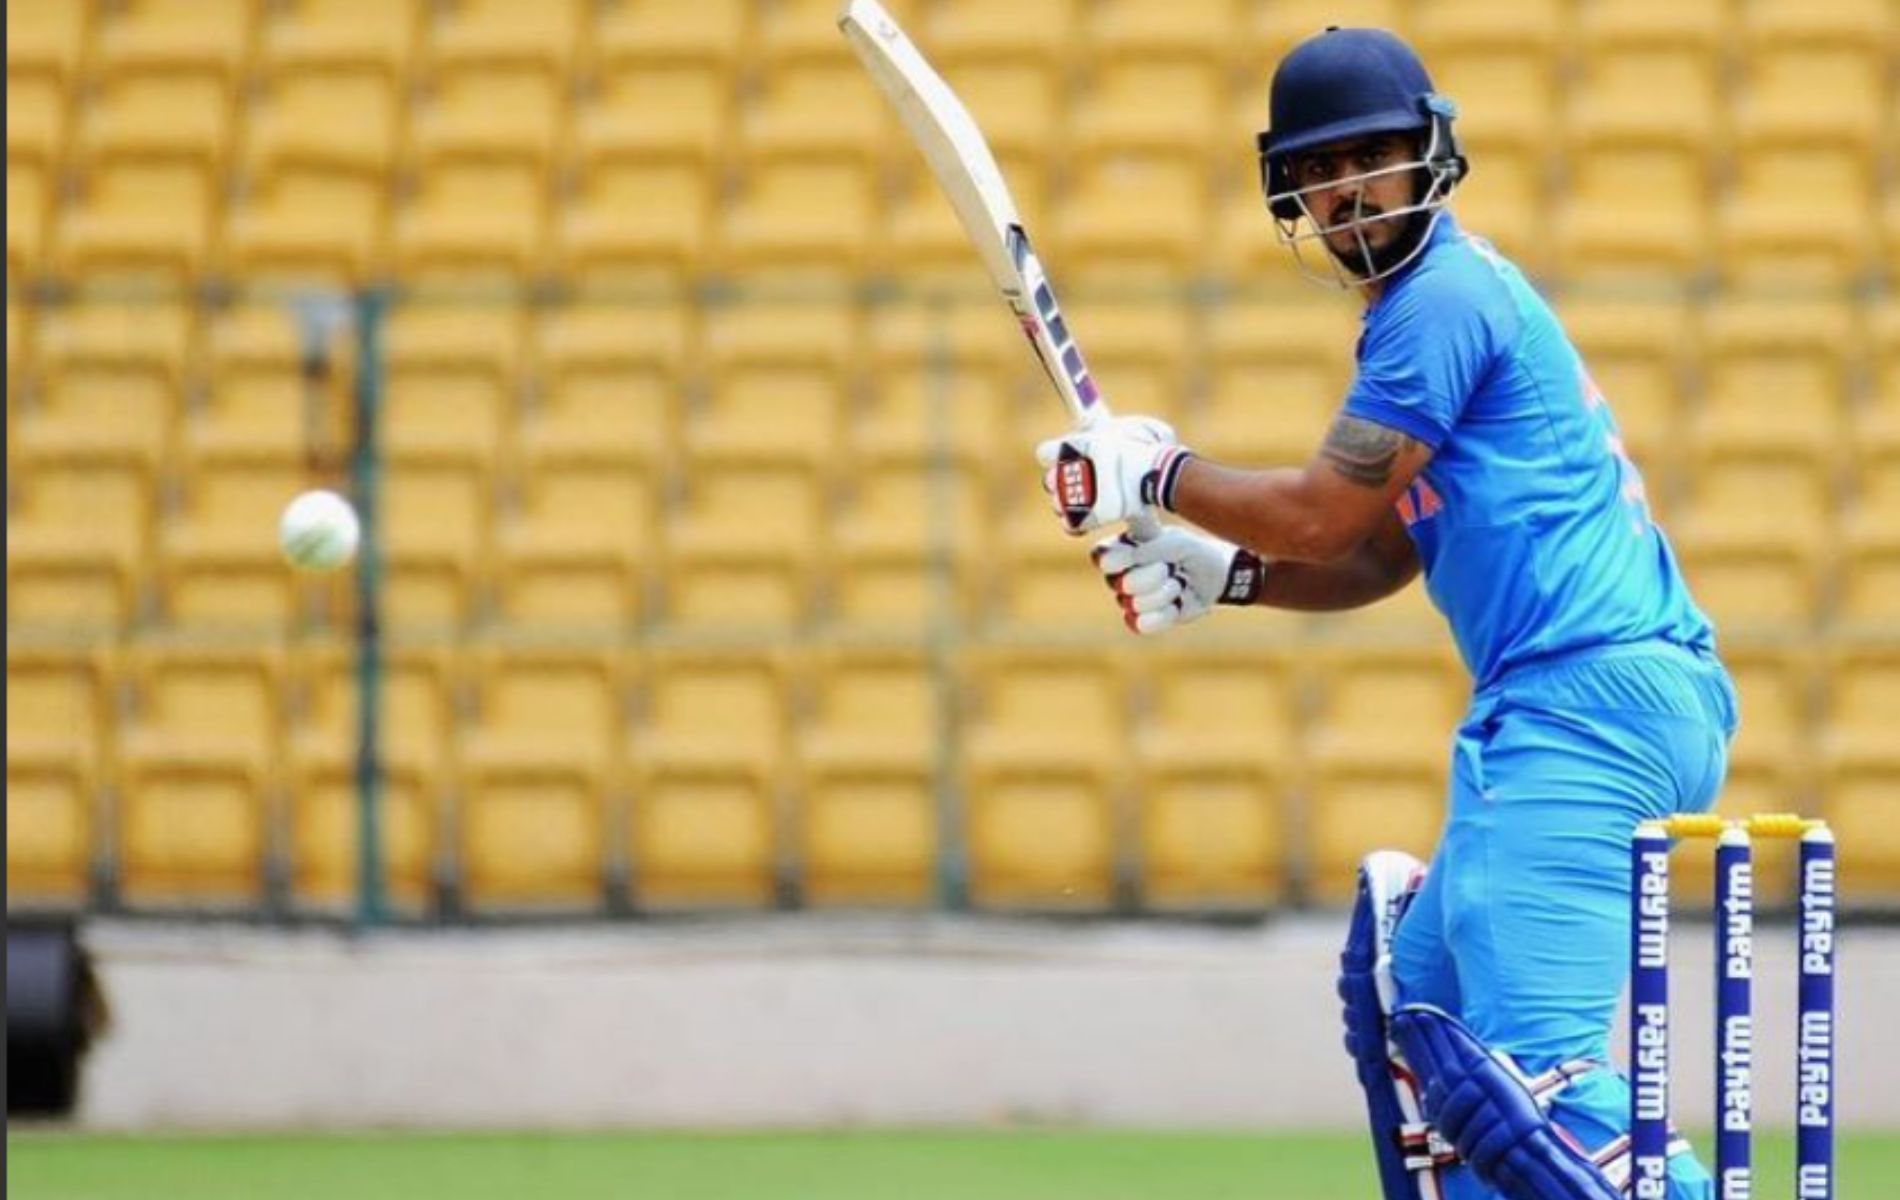 Syed Mushtaq Ali Trophy: Nitish Rana blitzed an unbeaten 50 off 25 deliveries against Chandigarh.